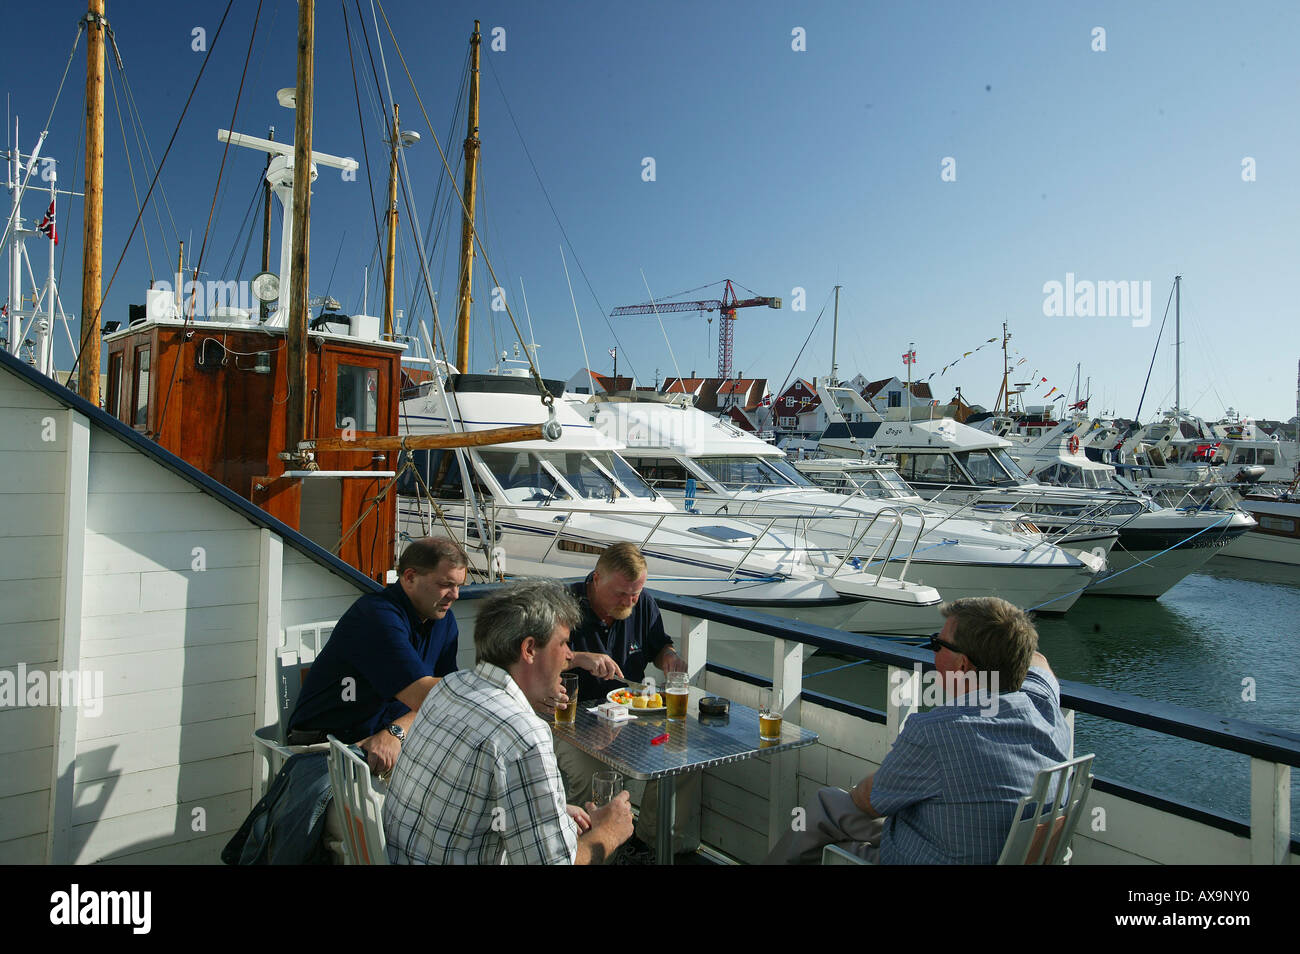 Cafe Laternen at the harbour, Skudeneshavn, Rogaland, Norway Stock Photo